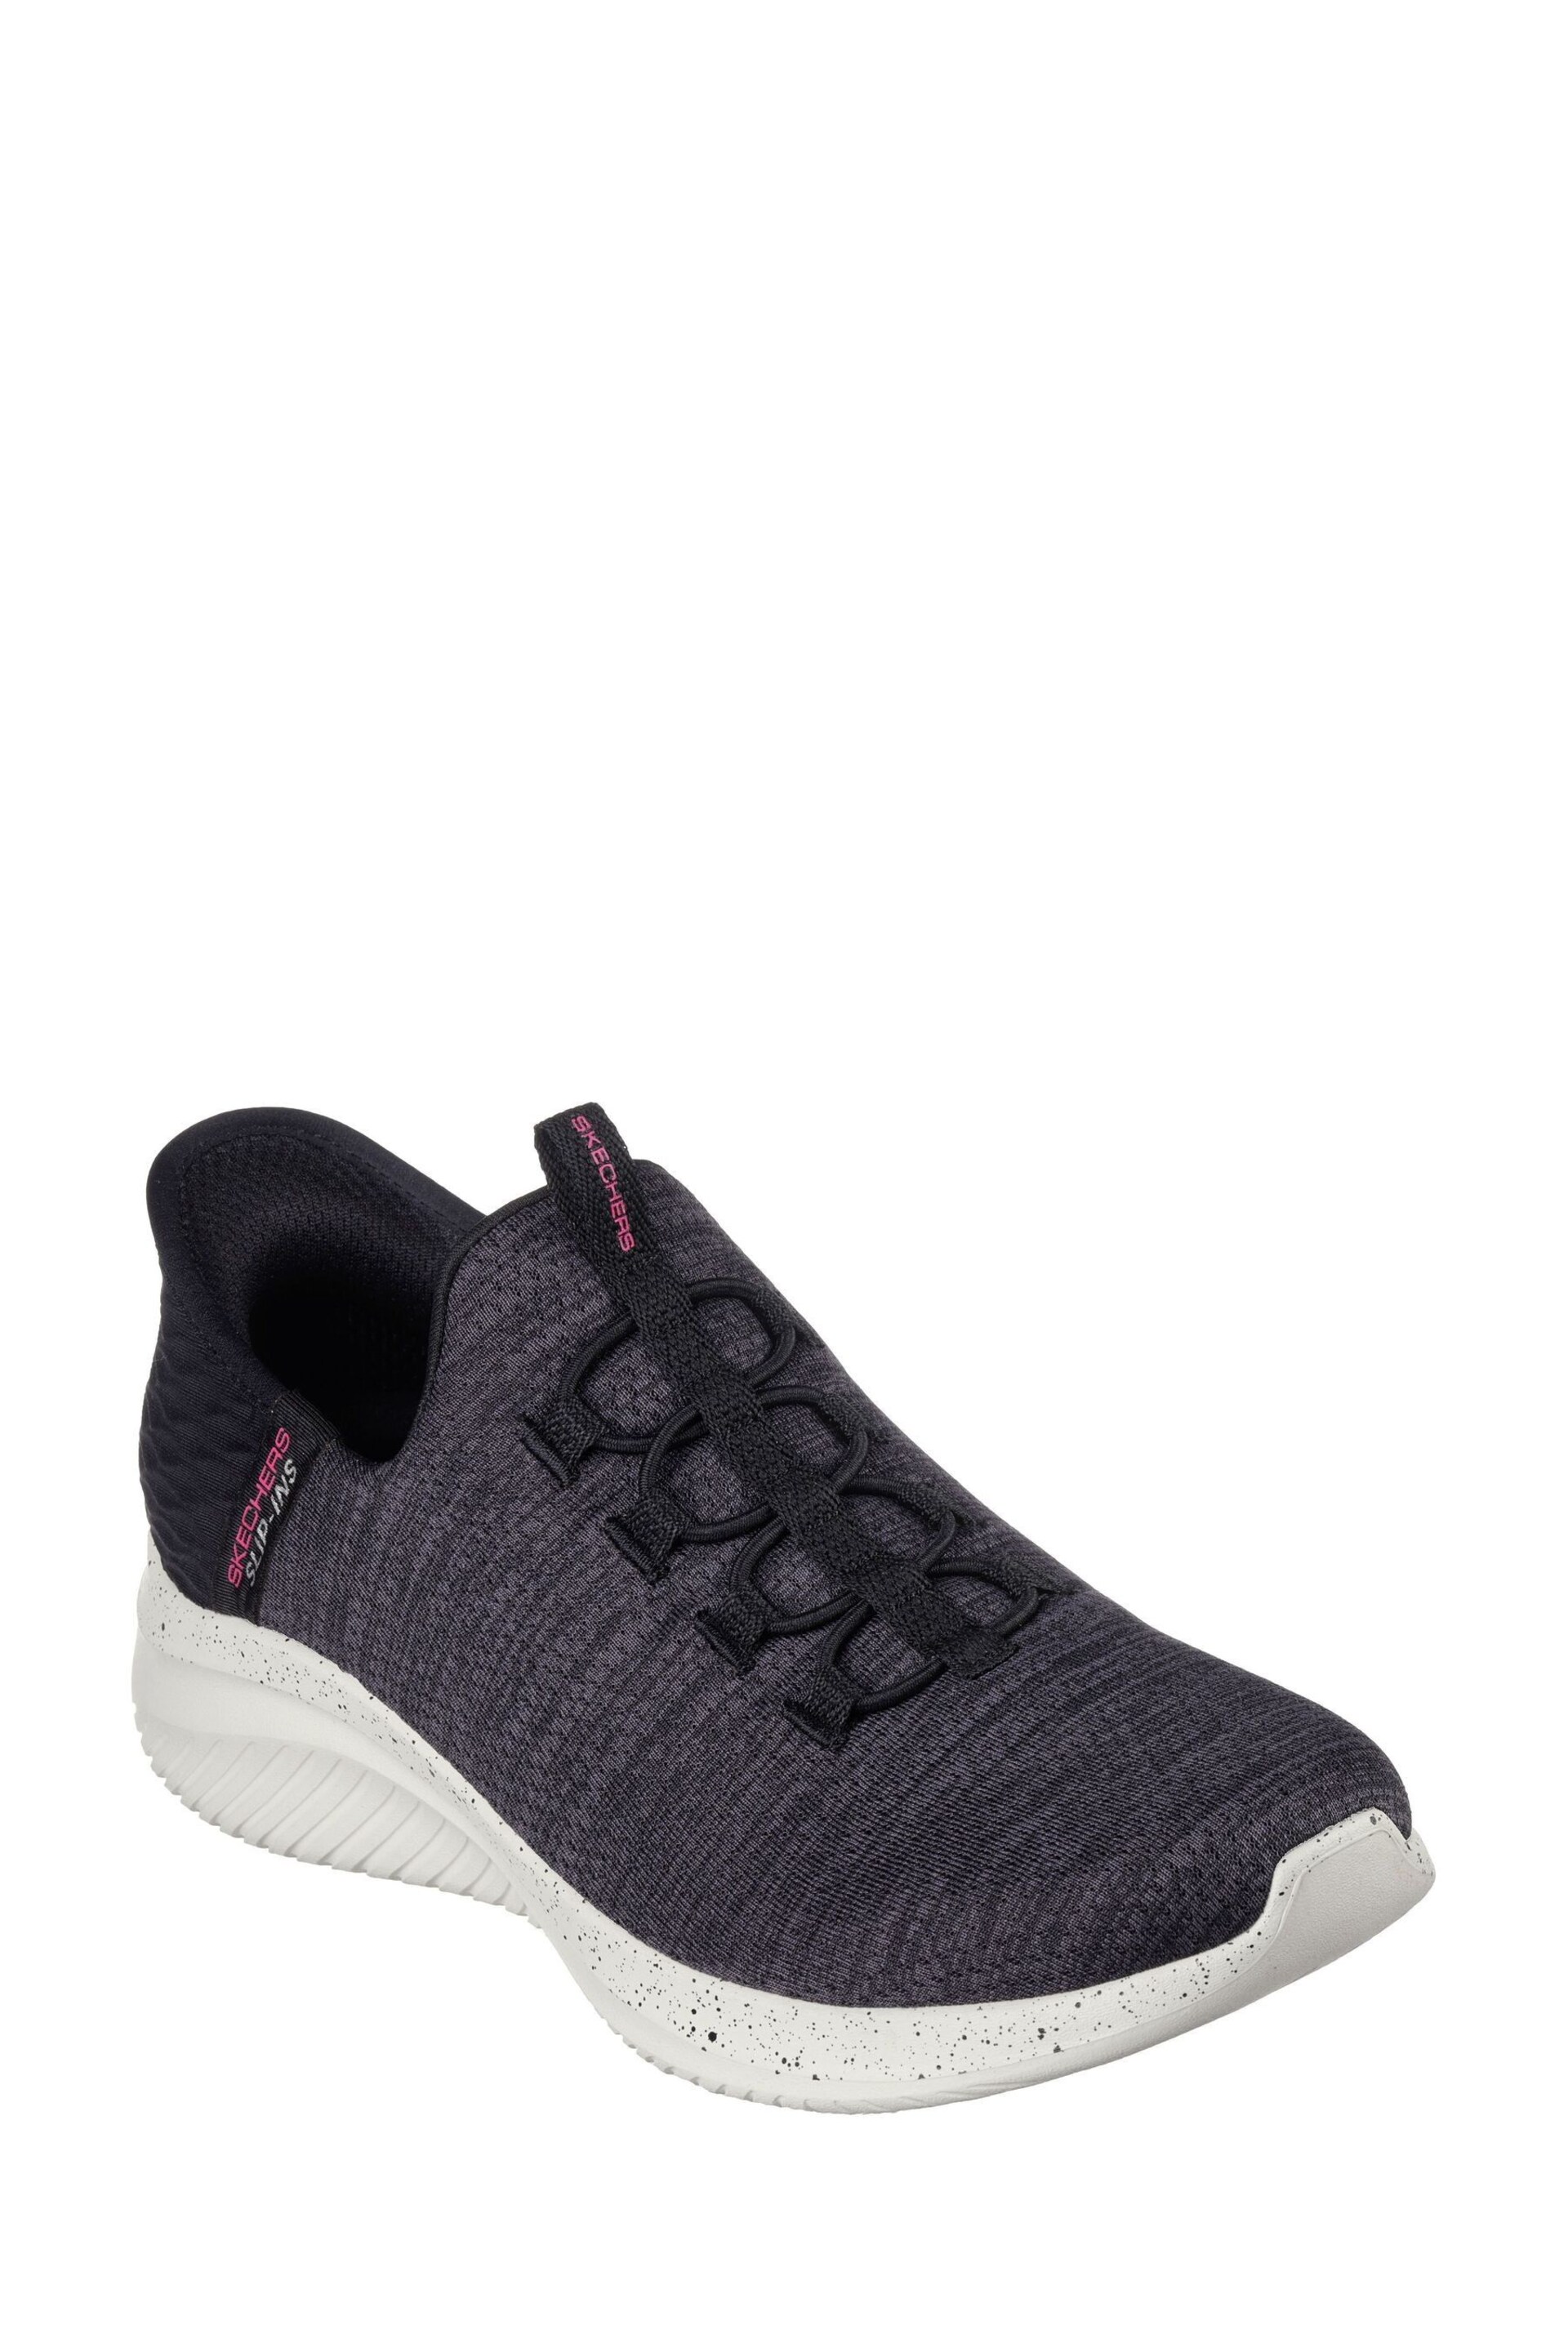 Skechers Black Womens Ultra Flex 3.0 Right Away Slip In Stretch Fit Trainers - Image 3 of 5